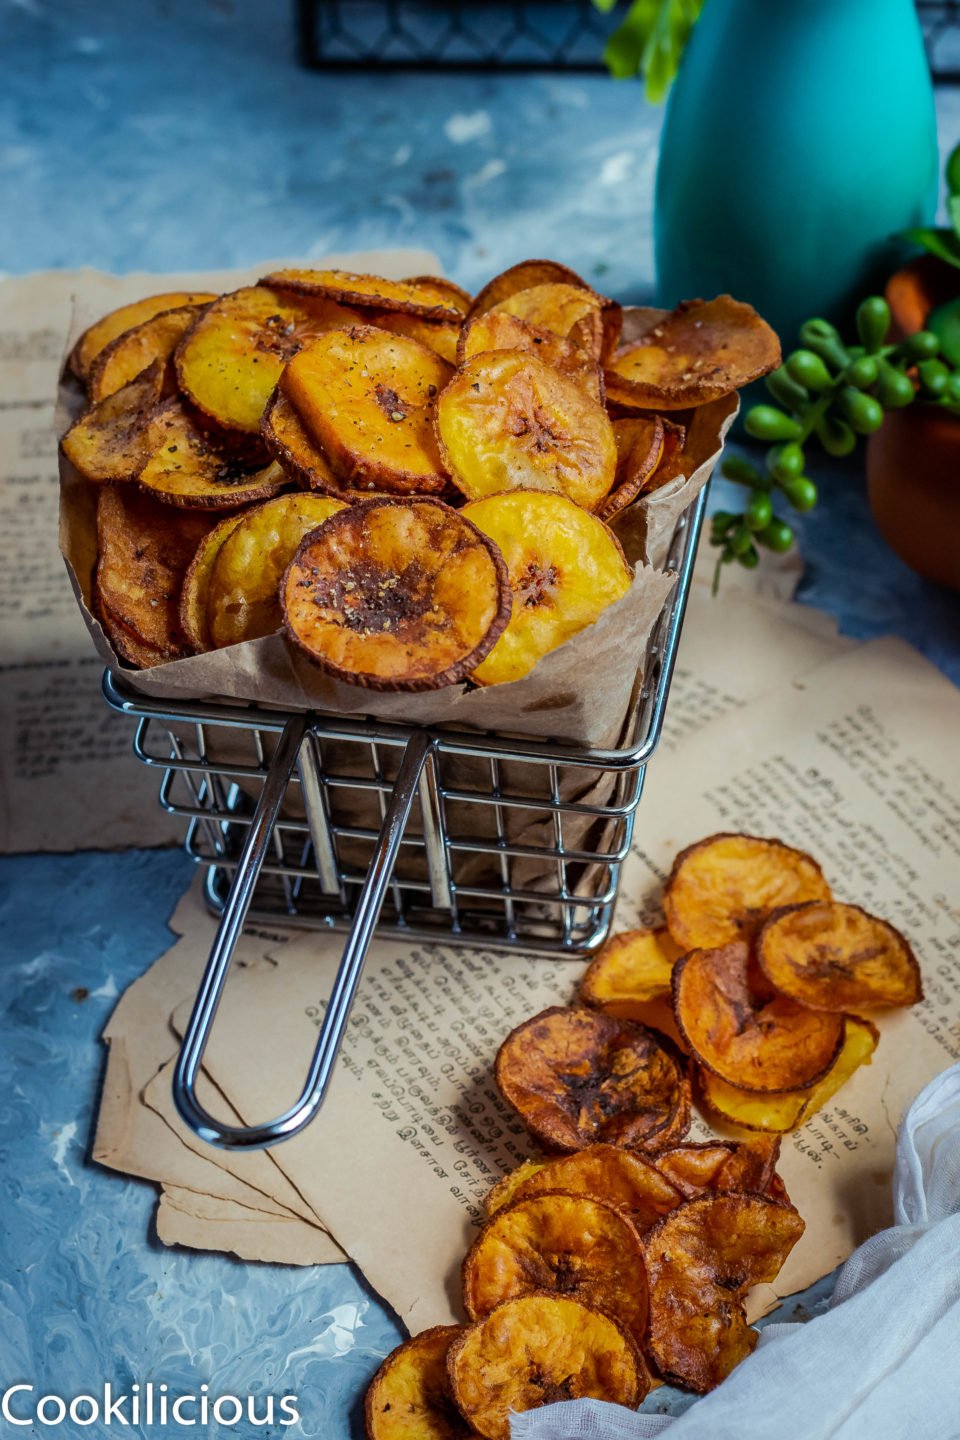 a basket filled with Fried Raw Banana Vegan Chips